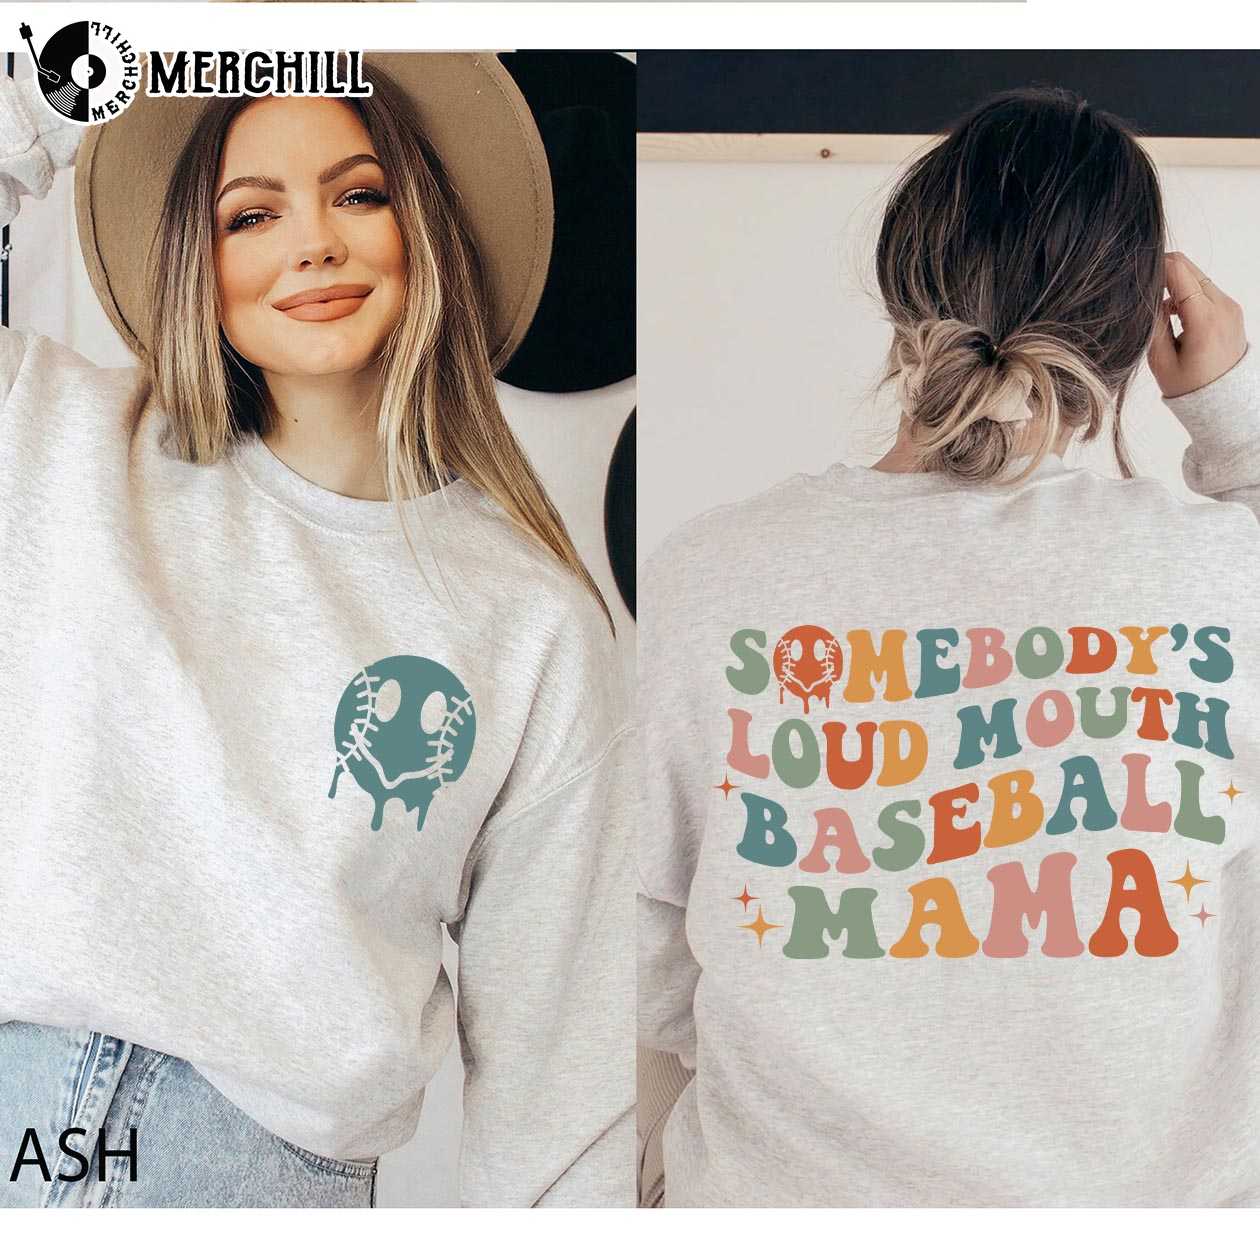 Somebody's Loud Mouth Baseball Mama Shirt, Game Day Mom Shirt - Ink In  Action